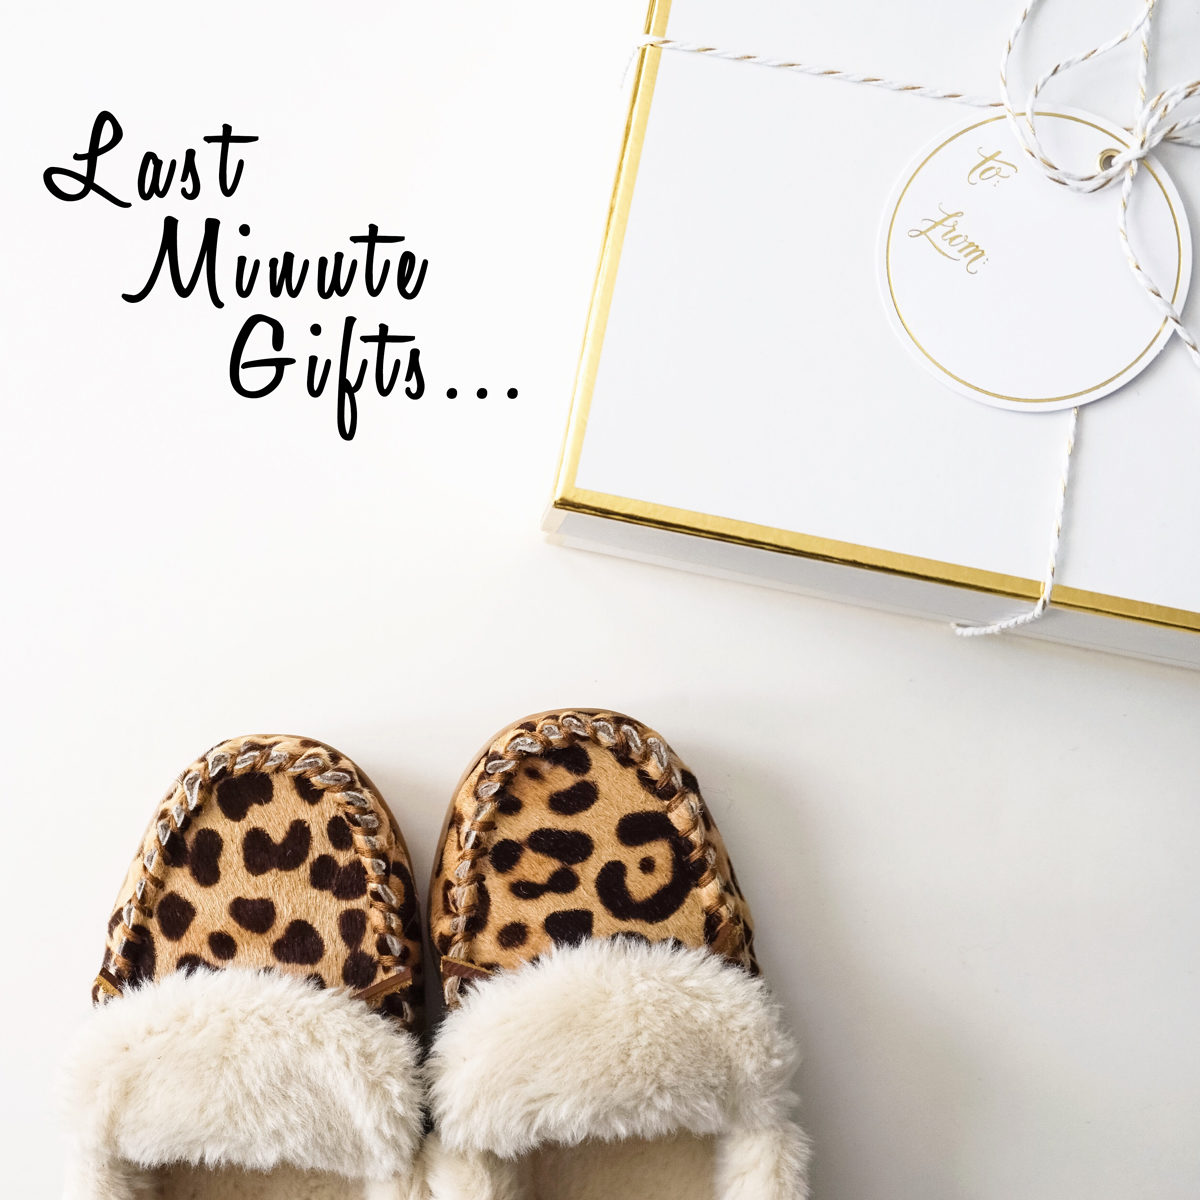 last minute gifts-holiday gifts-christmas gifts-leopard fuzzy slippers